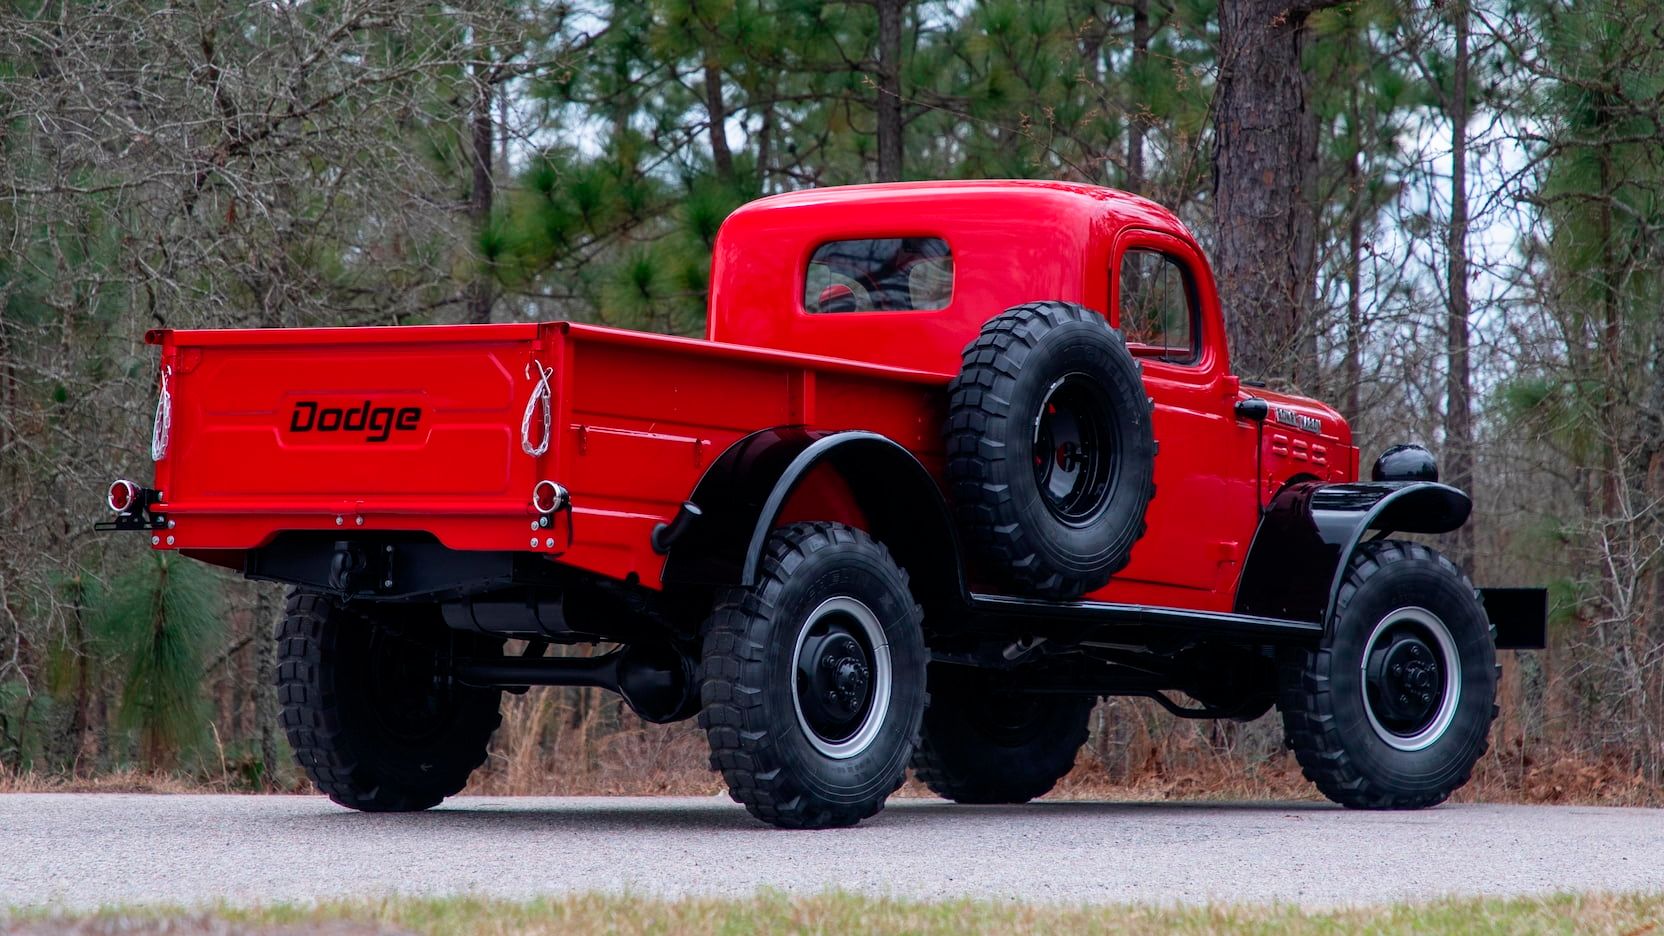 Red Dodge Power Wagon on an autumn day